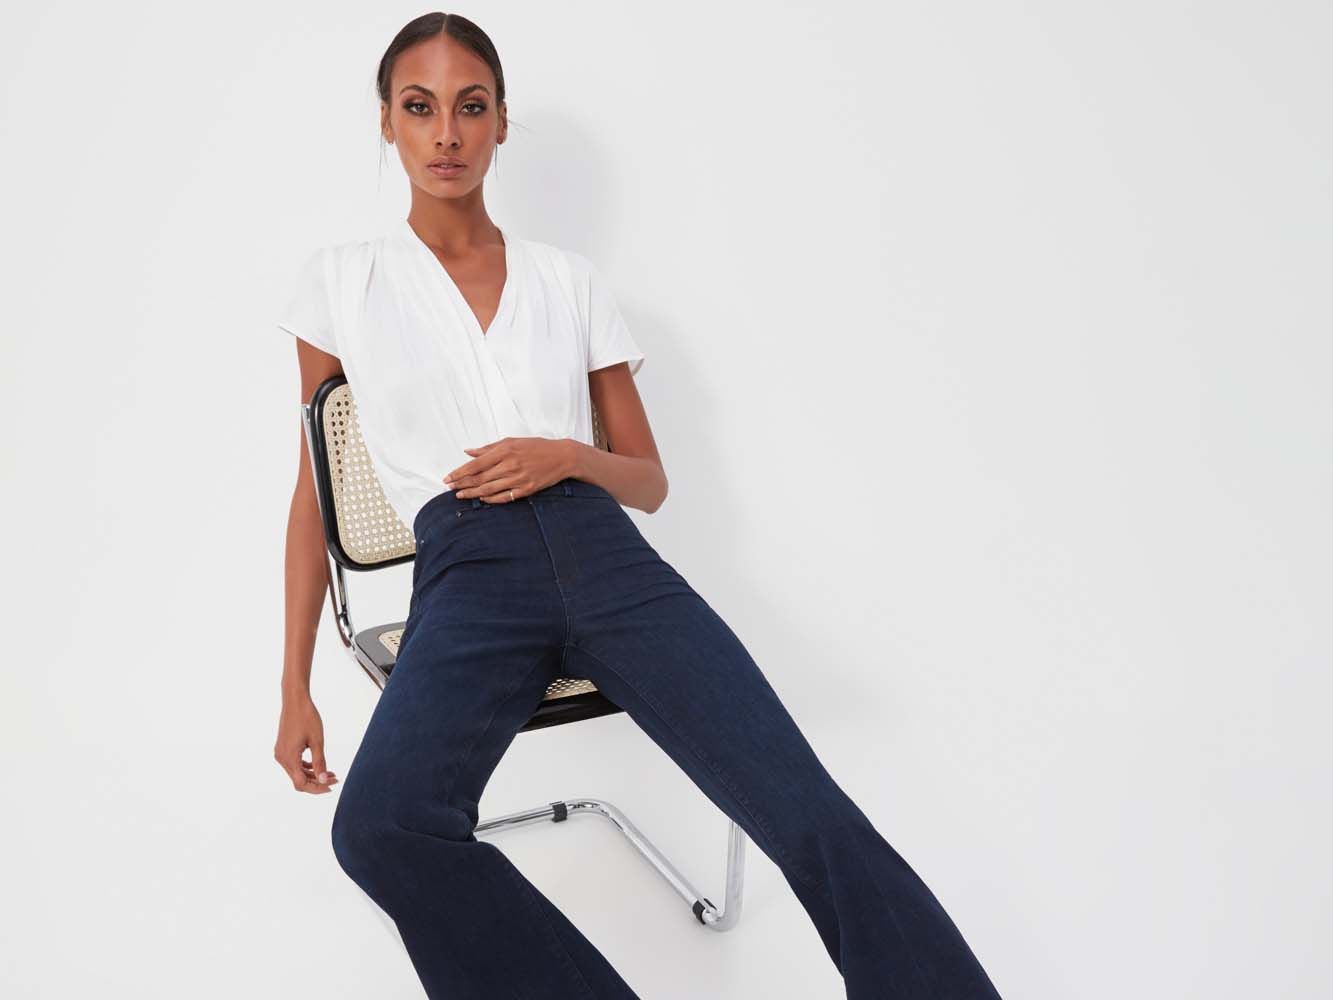 The Denim Brands & Cuts You Need To Know In 2015 | FashionBeans